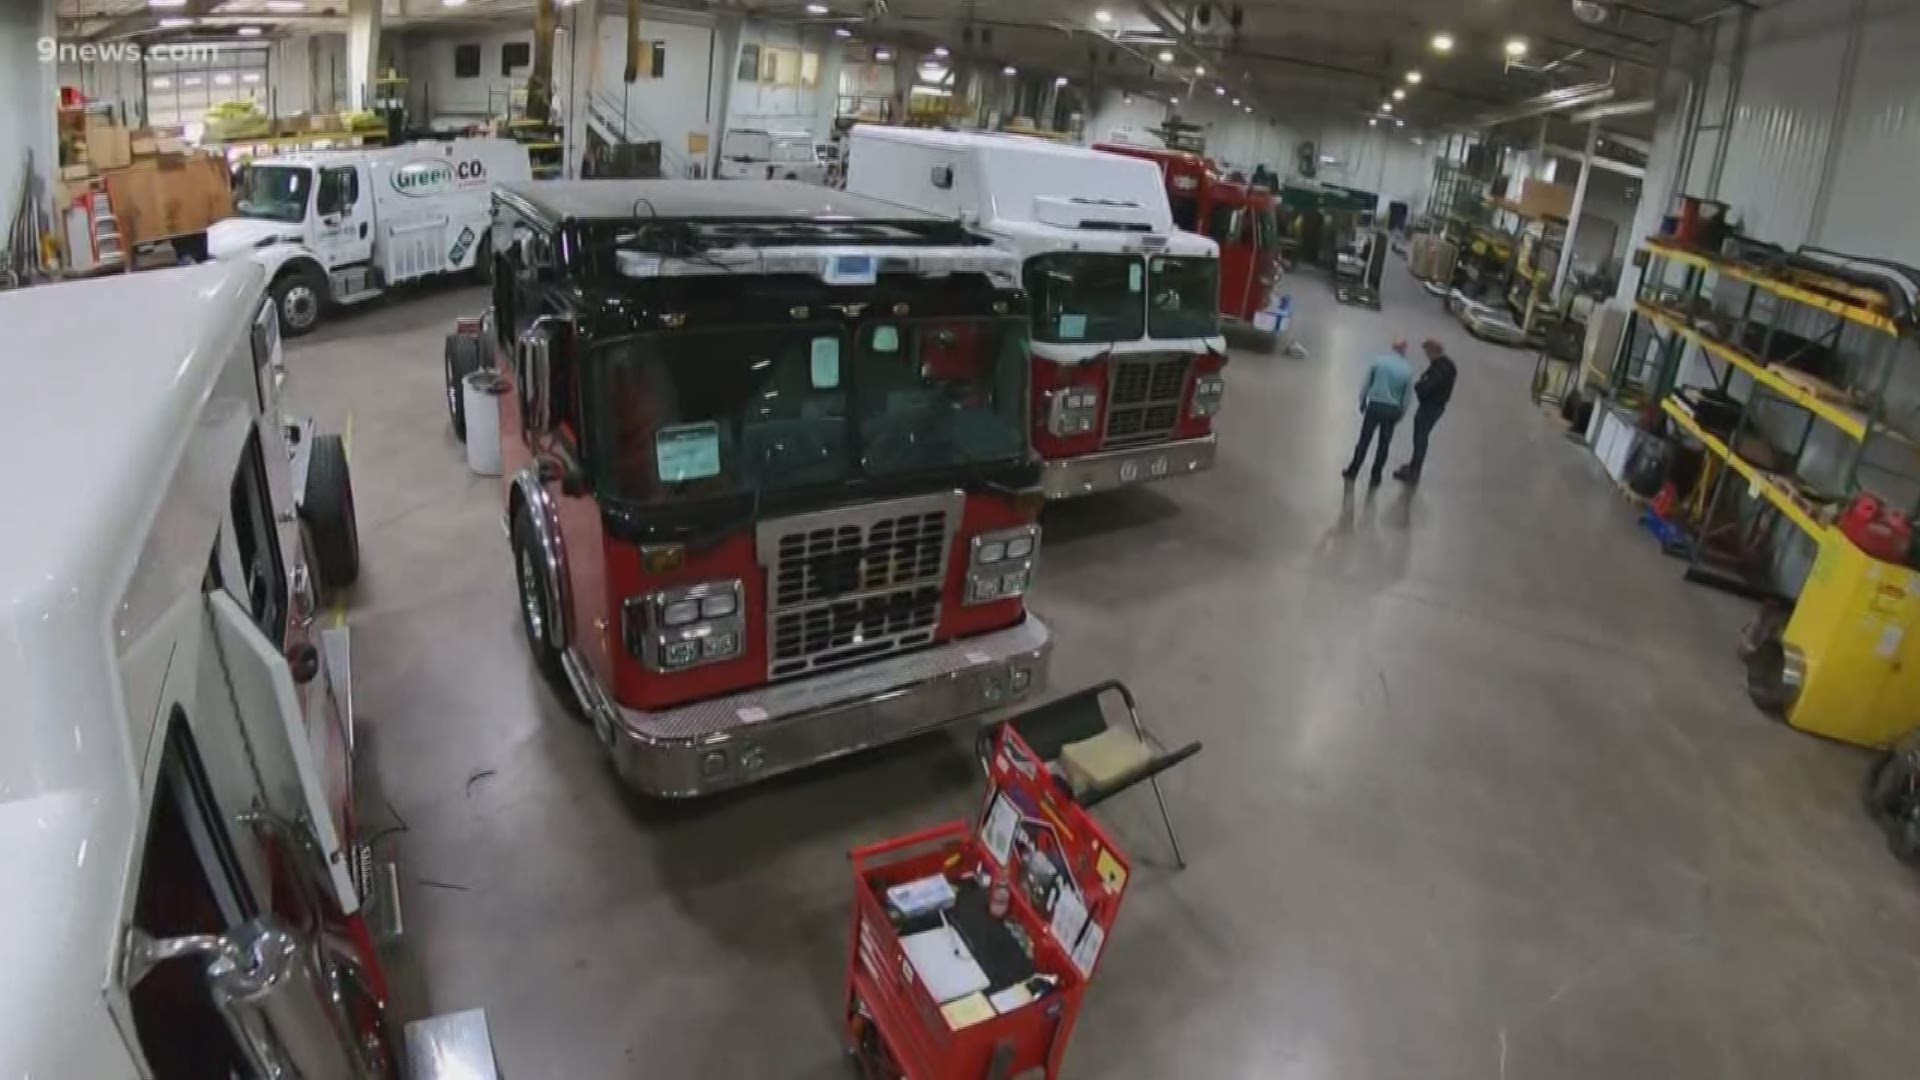 This year, the factory is building more than 20 firetrucks for Colorado fire departments.